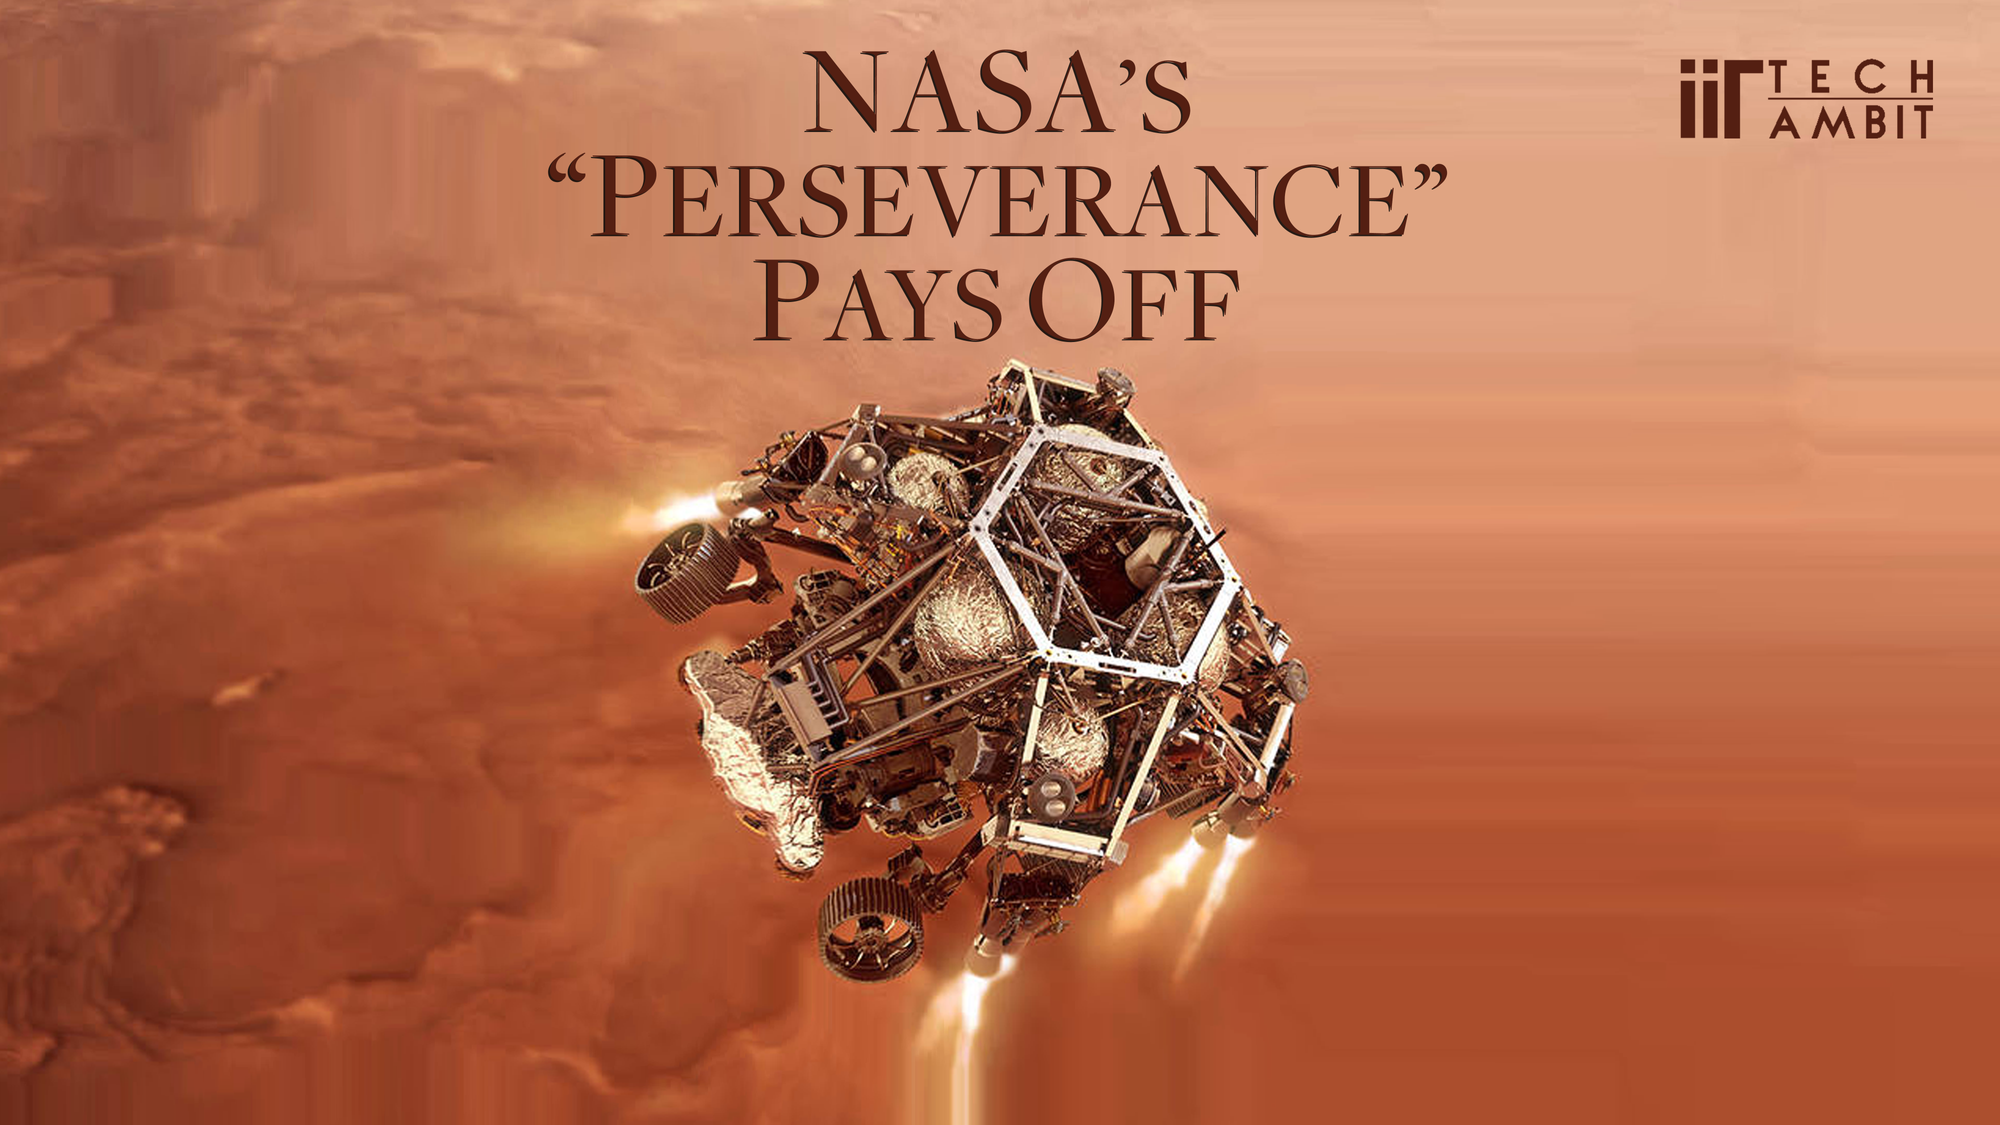 NASA’S "Perseverance" pays off